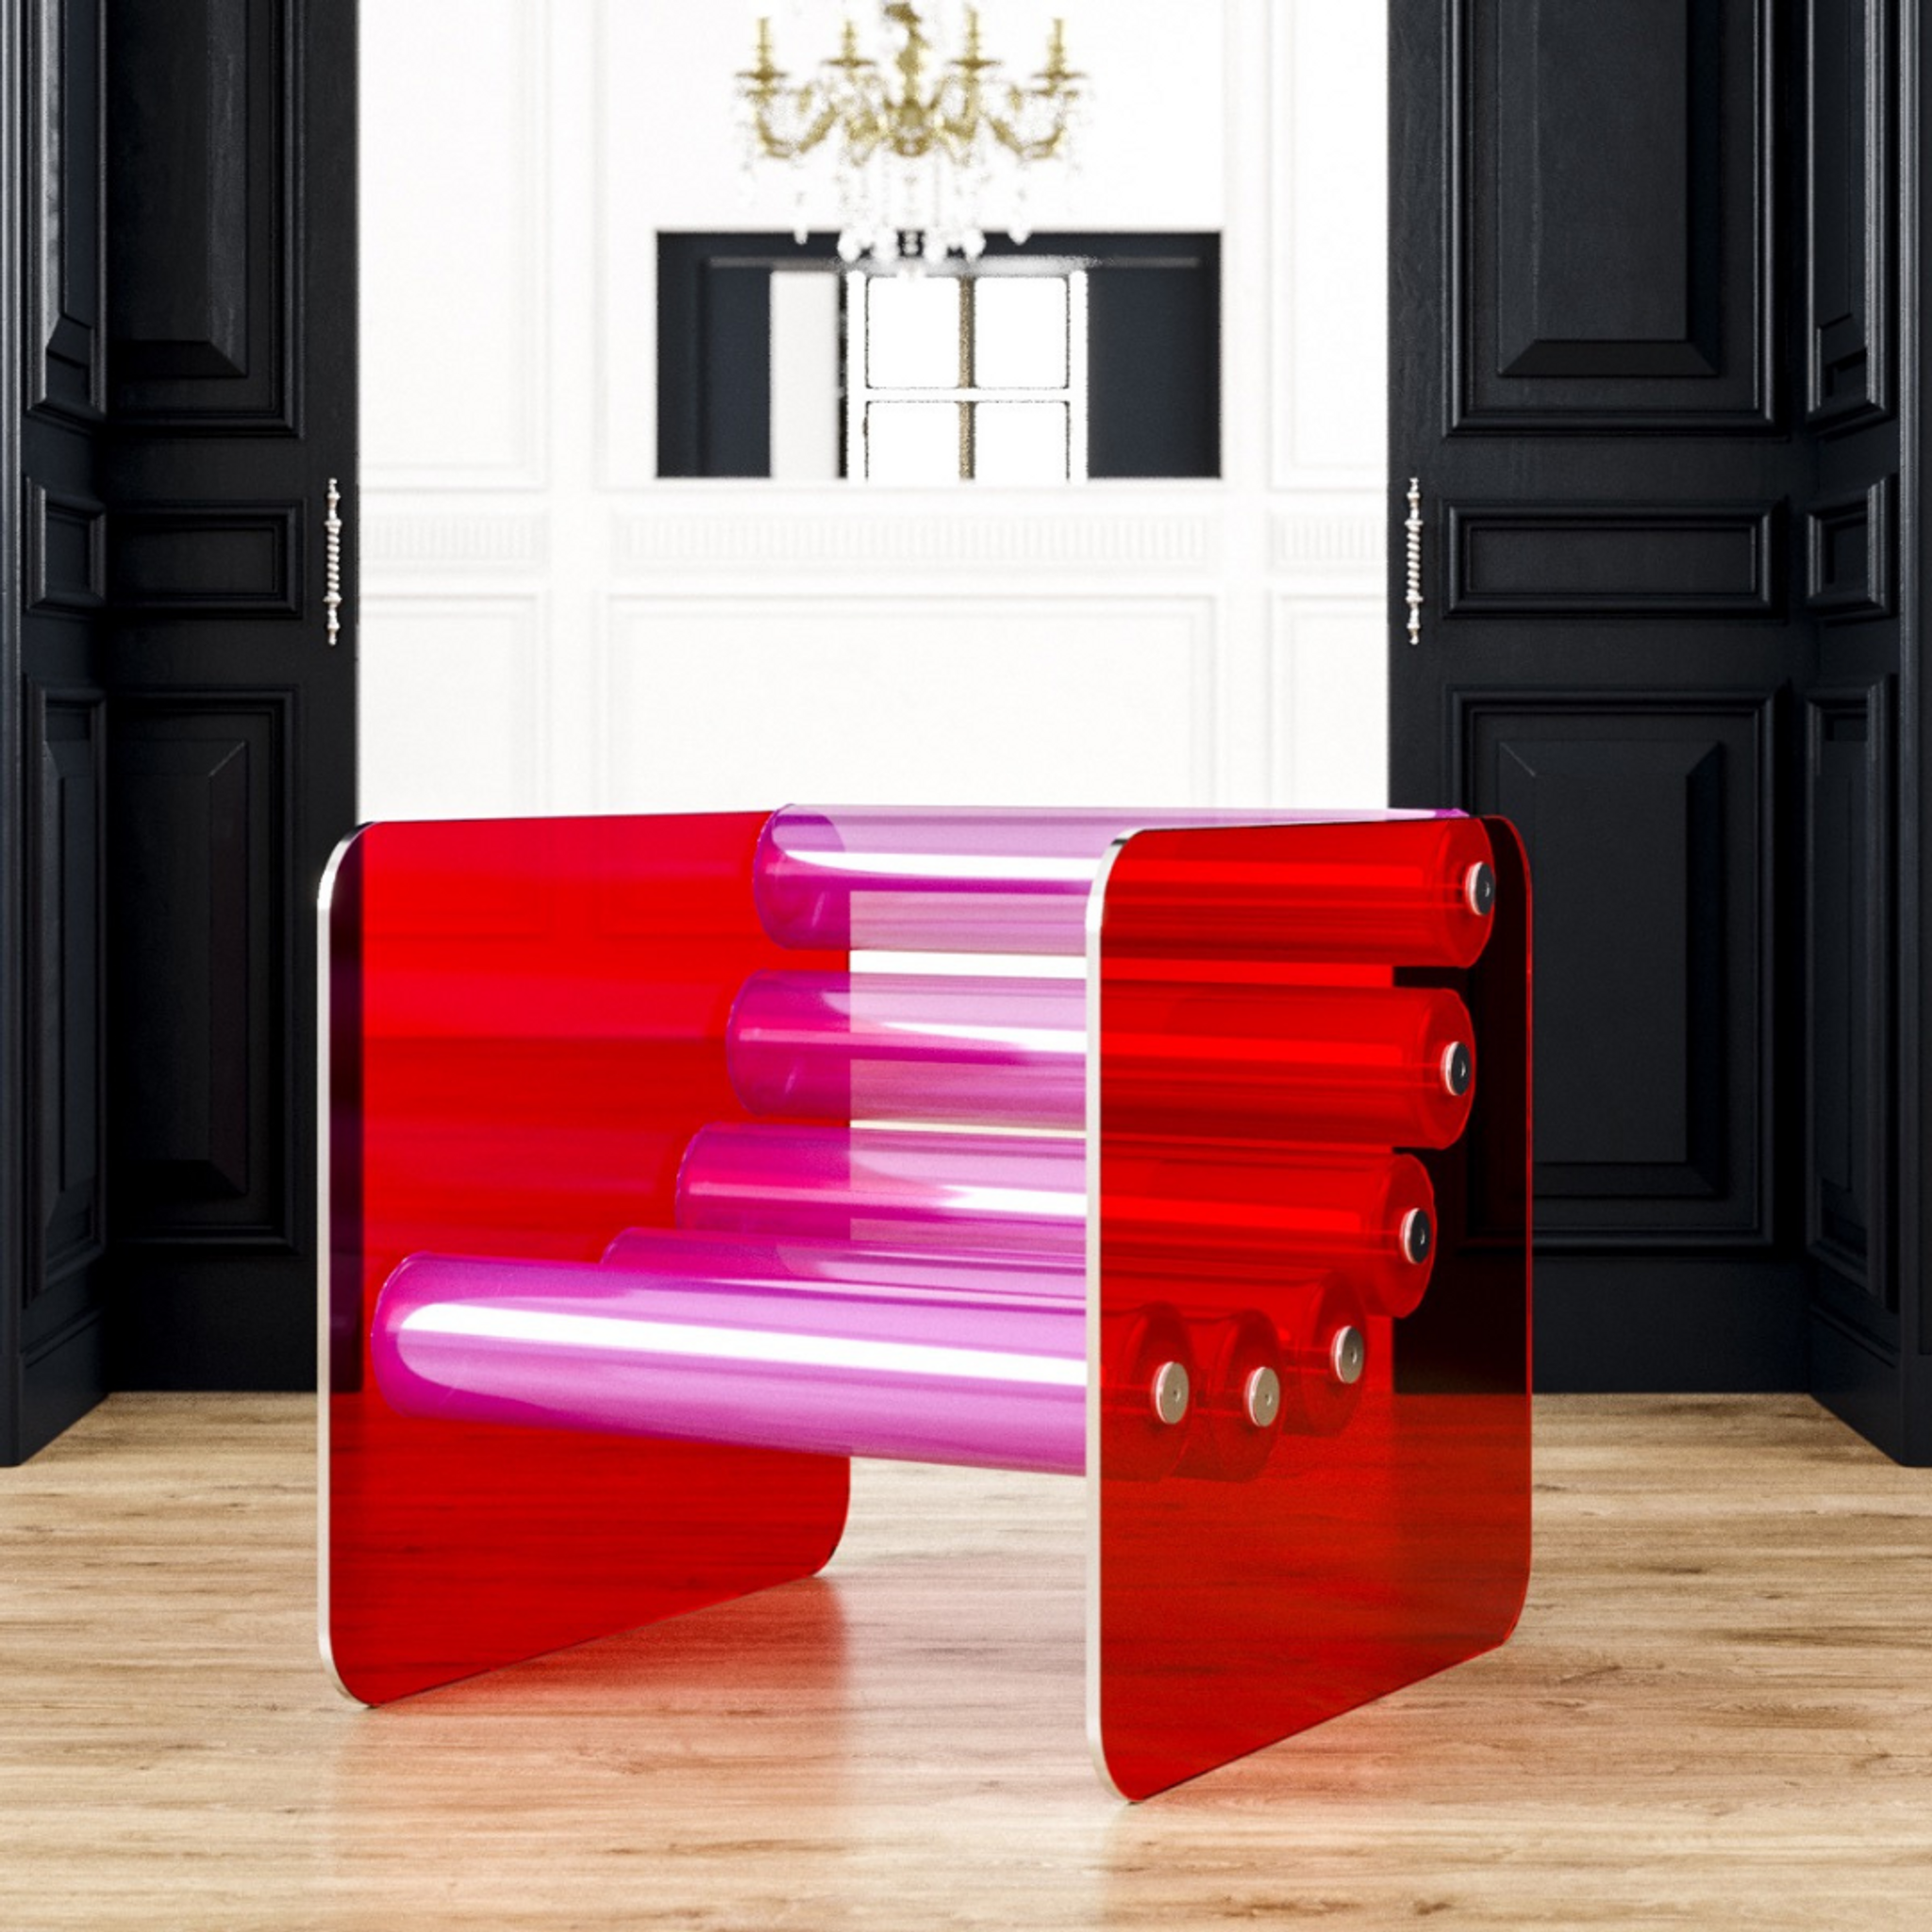 Modern Red Glass Armchair with Pink Bolster Cushions 